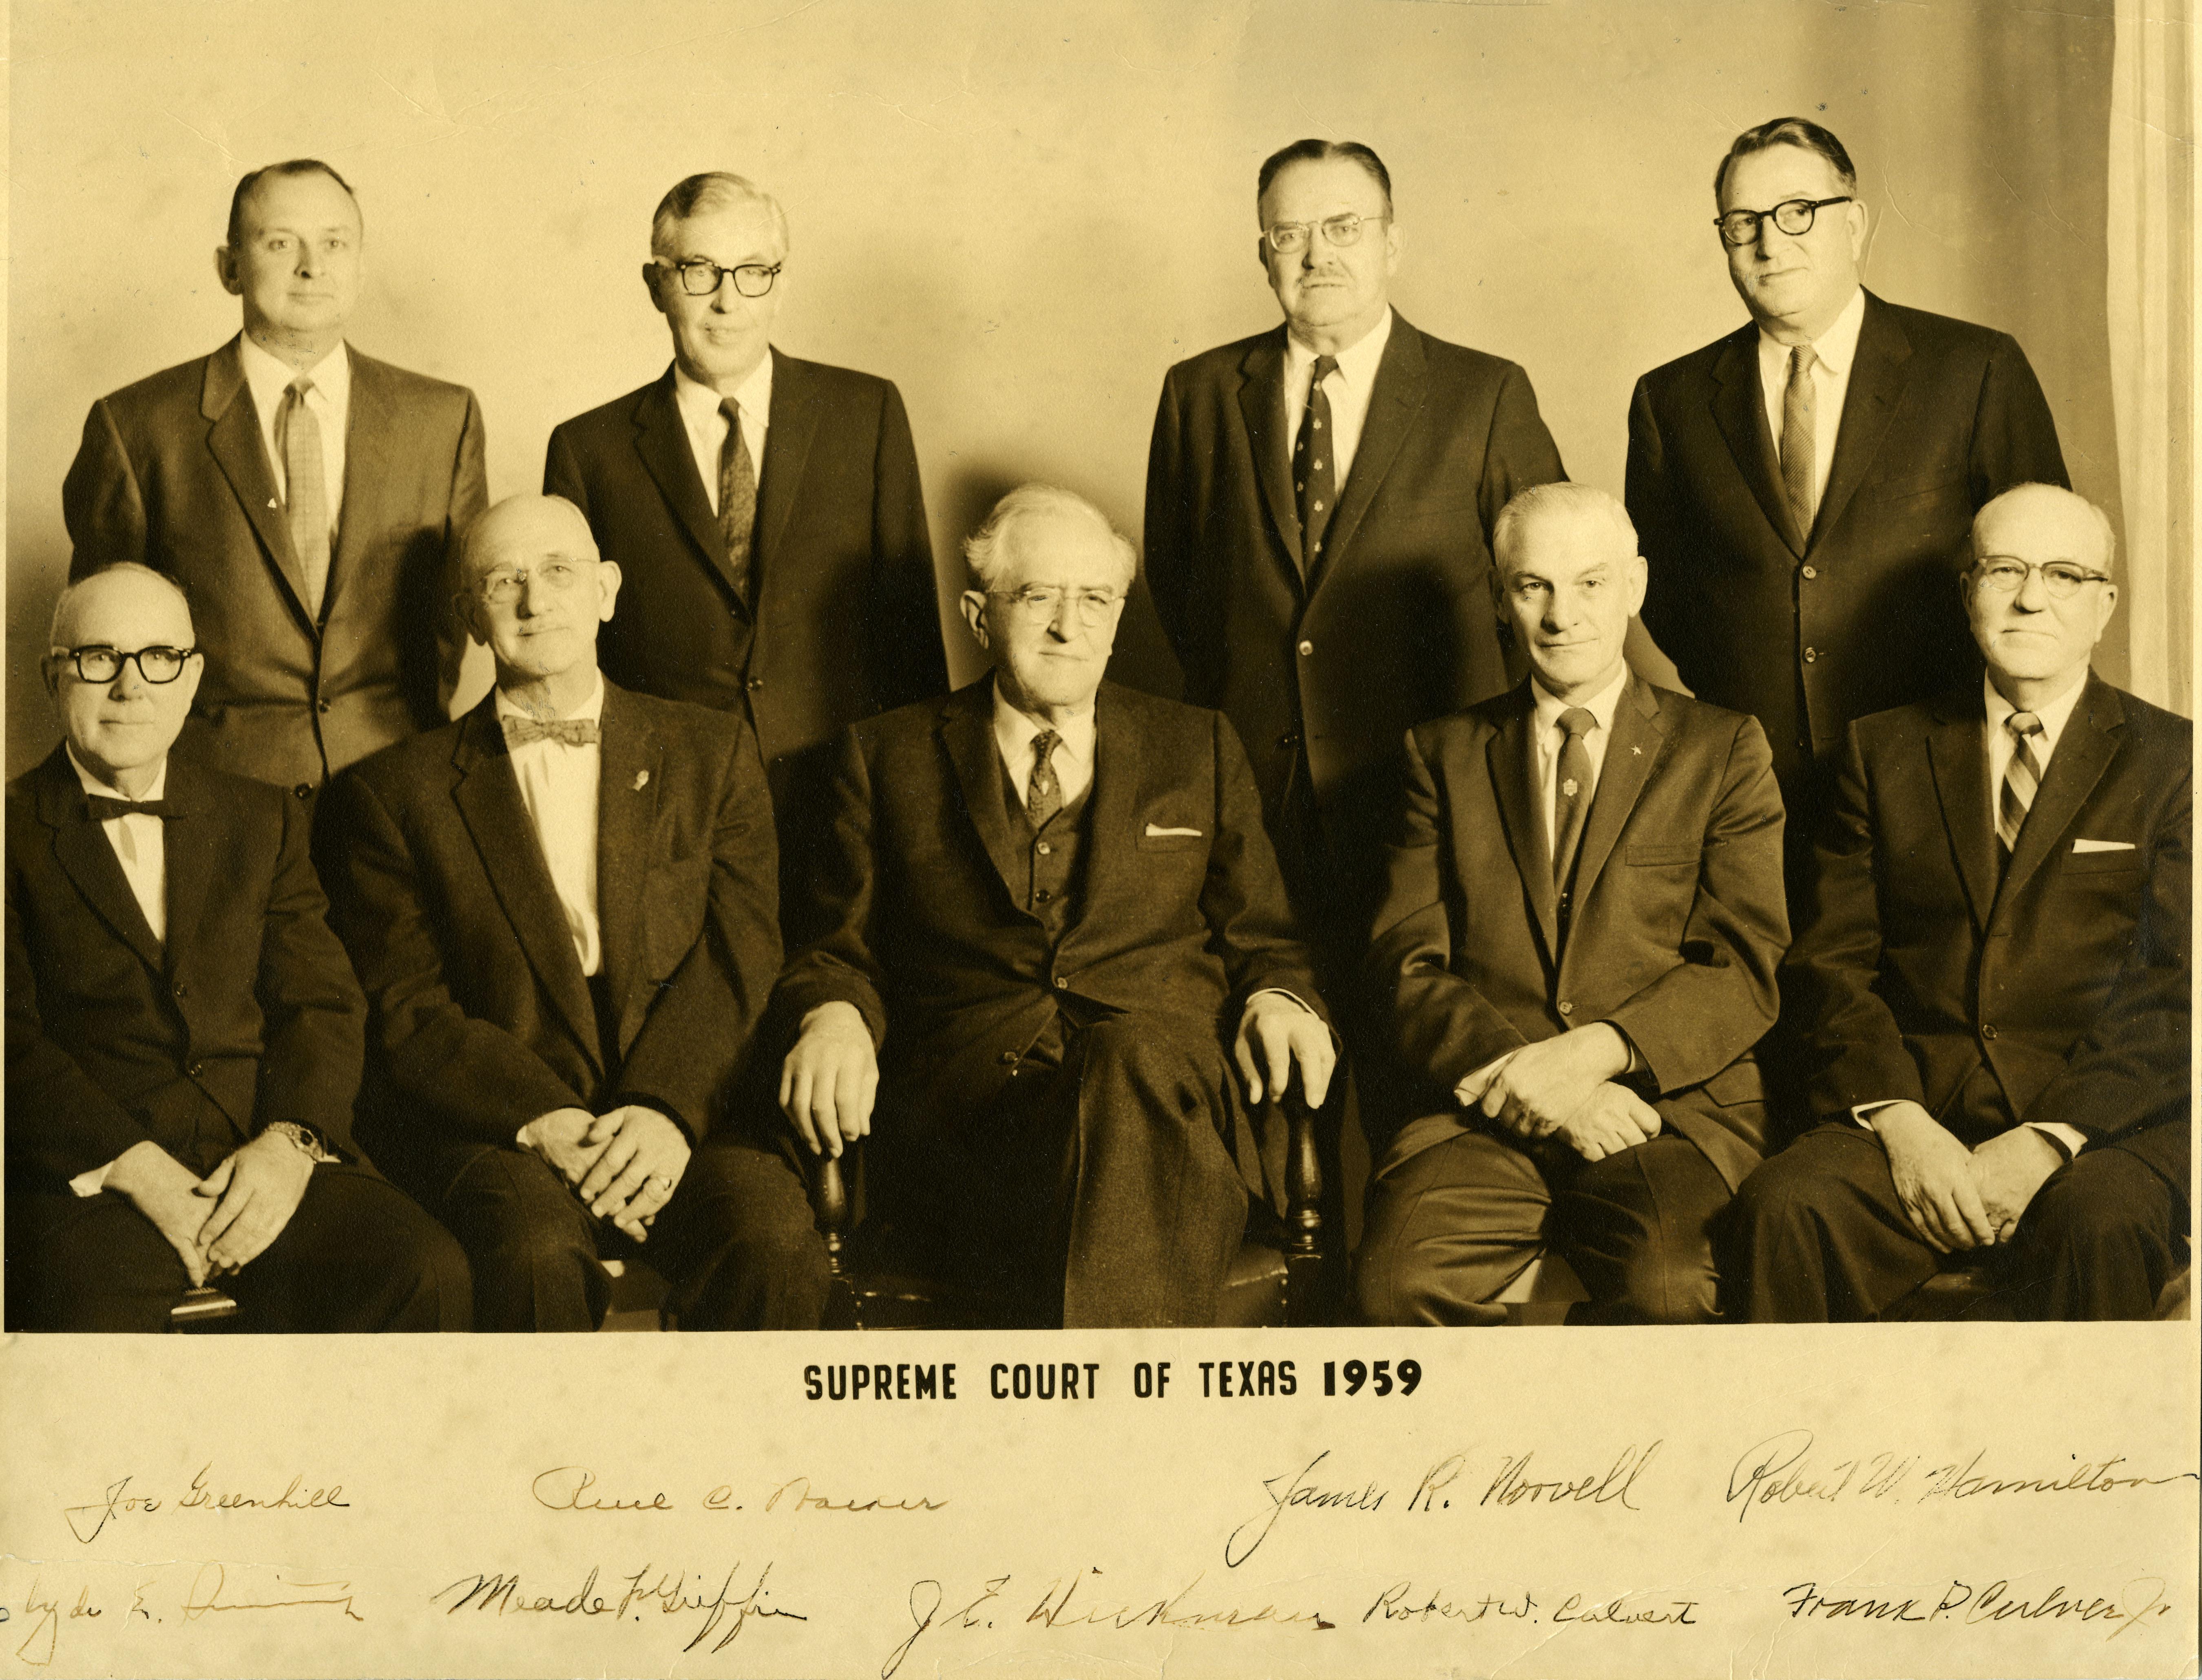 1959 Supreme Court, signed by the justices. Photo: Texas Supreme Court Archives.